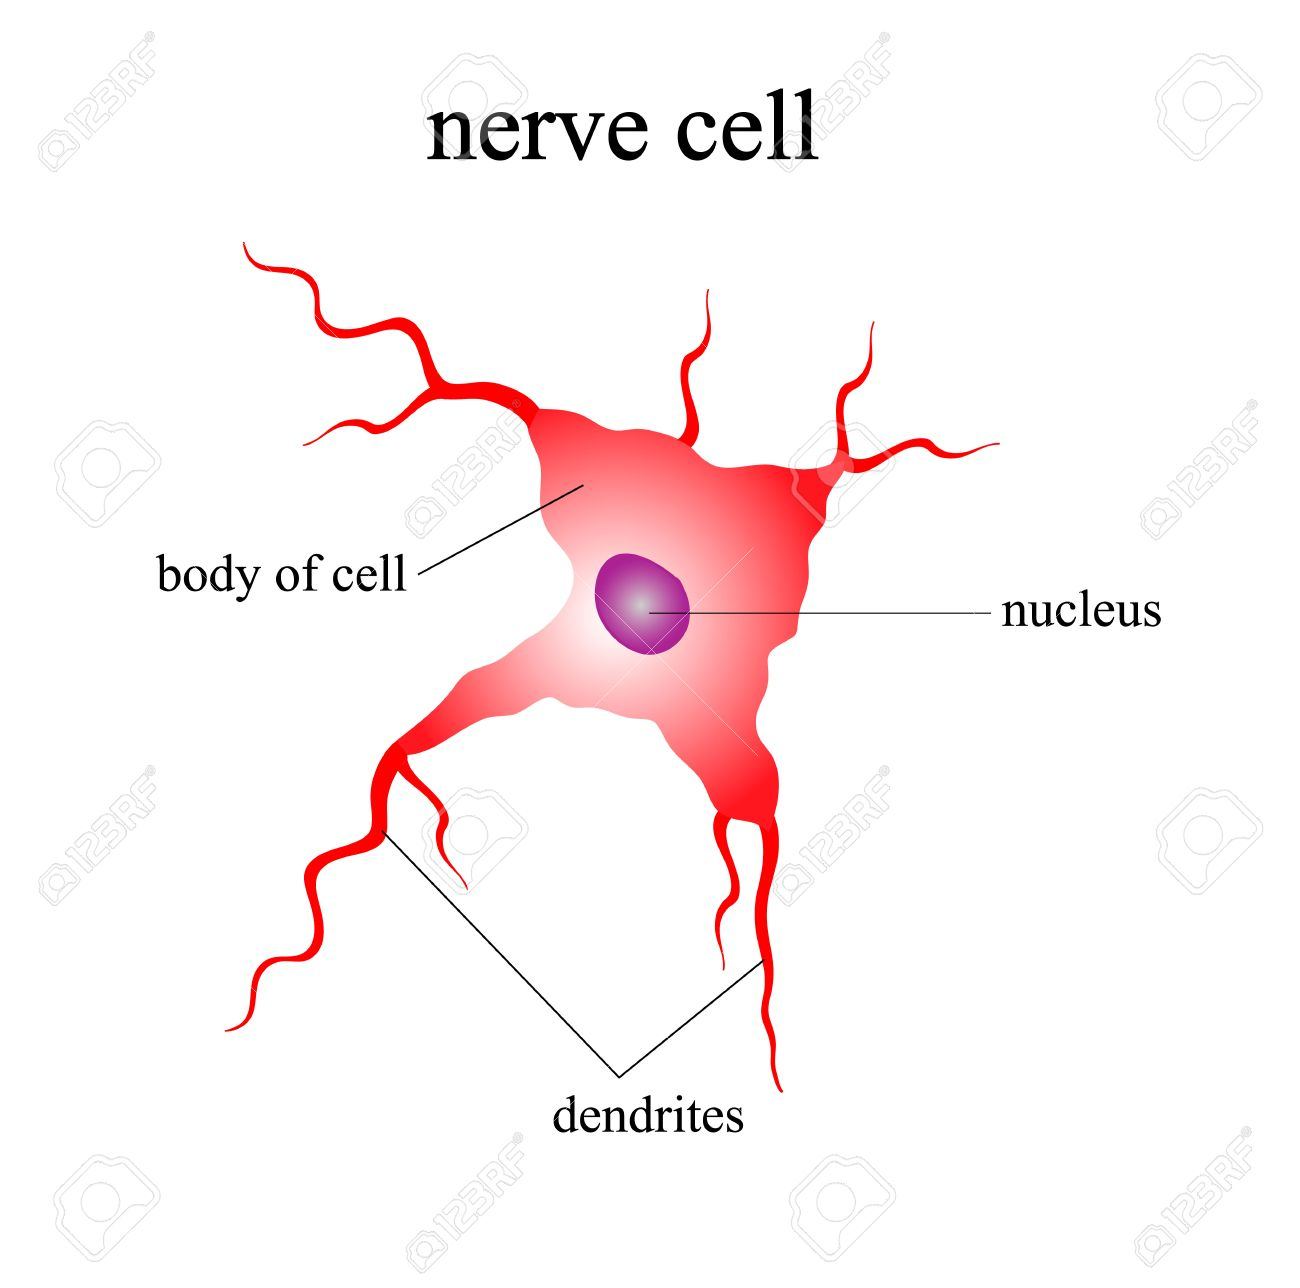 Nerve Cell Diagram 11 Human Nerve Cell Diagram Nerv Anatomy Education Picture